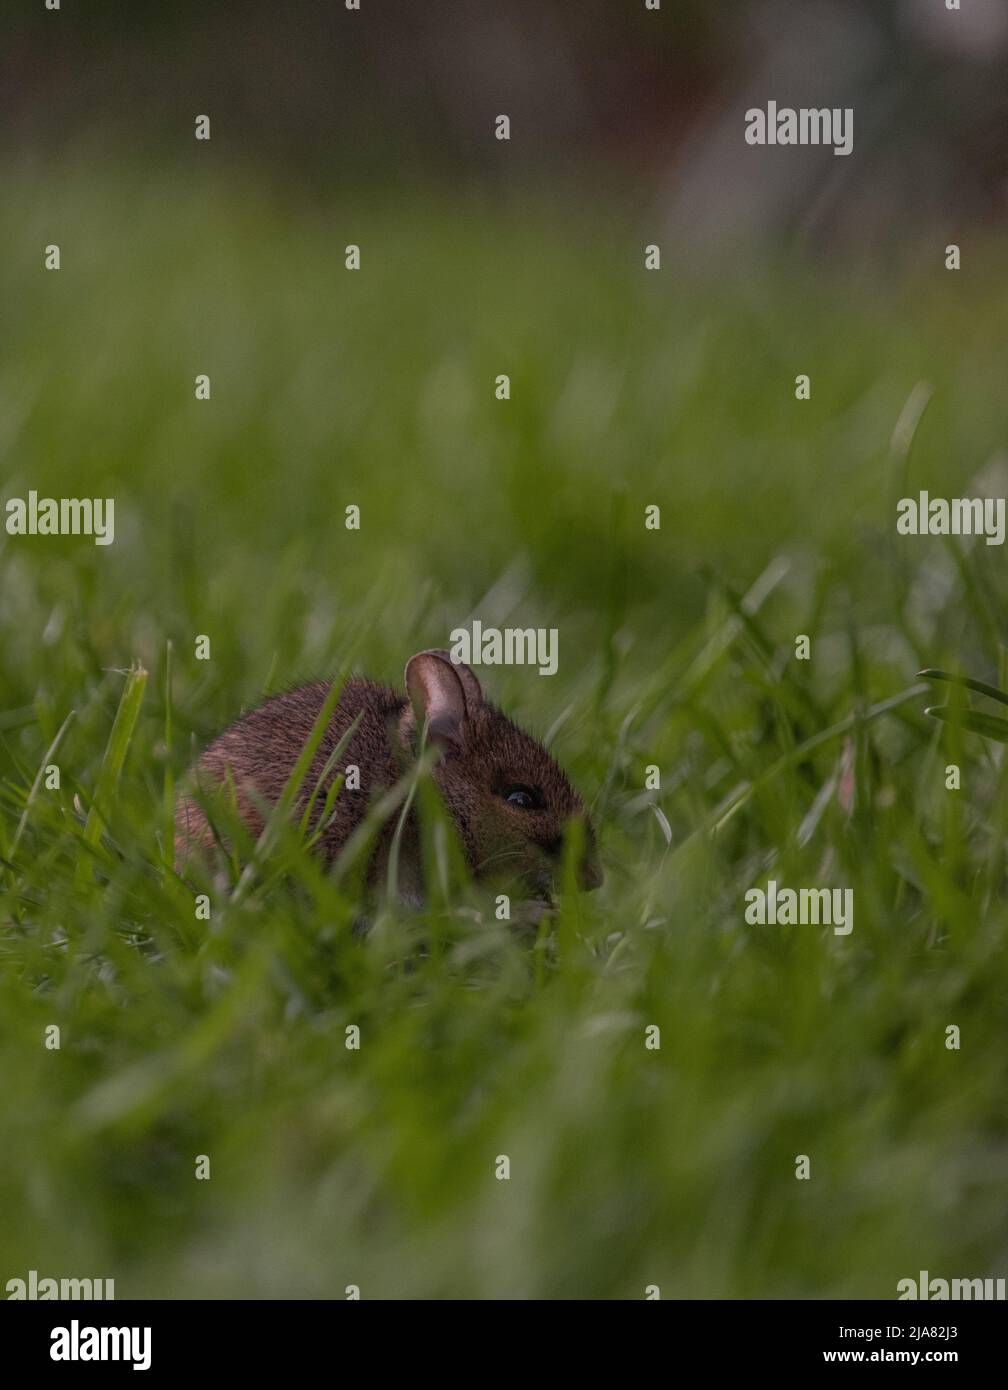 Long-tailed / Common field Mouse (apodemus sylvaticus), hiding amongst blades of grass. Stock Photo